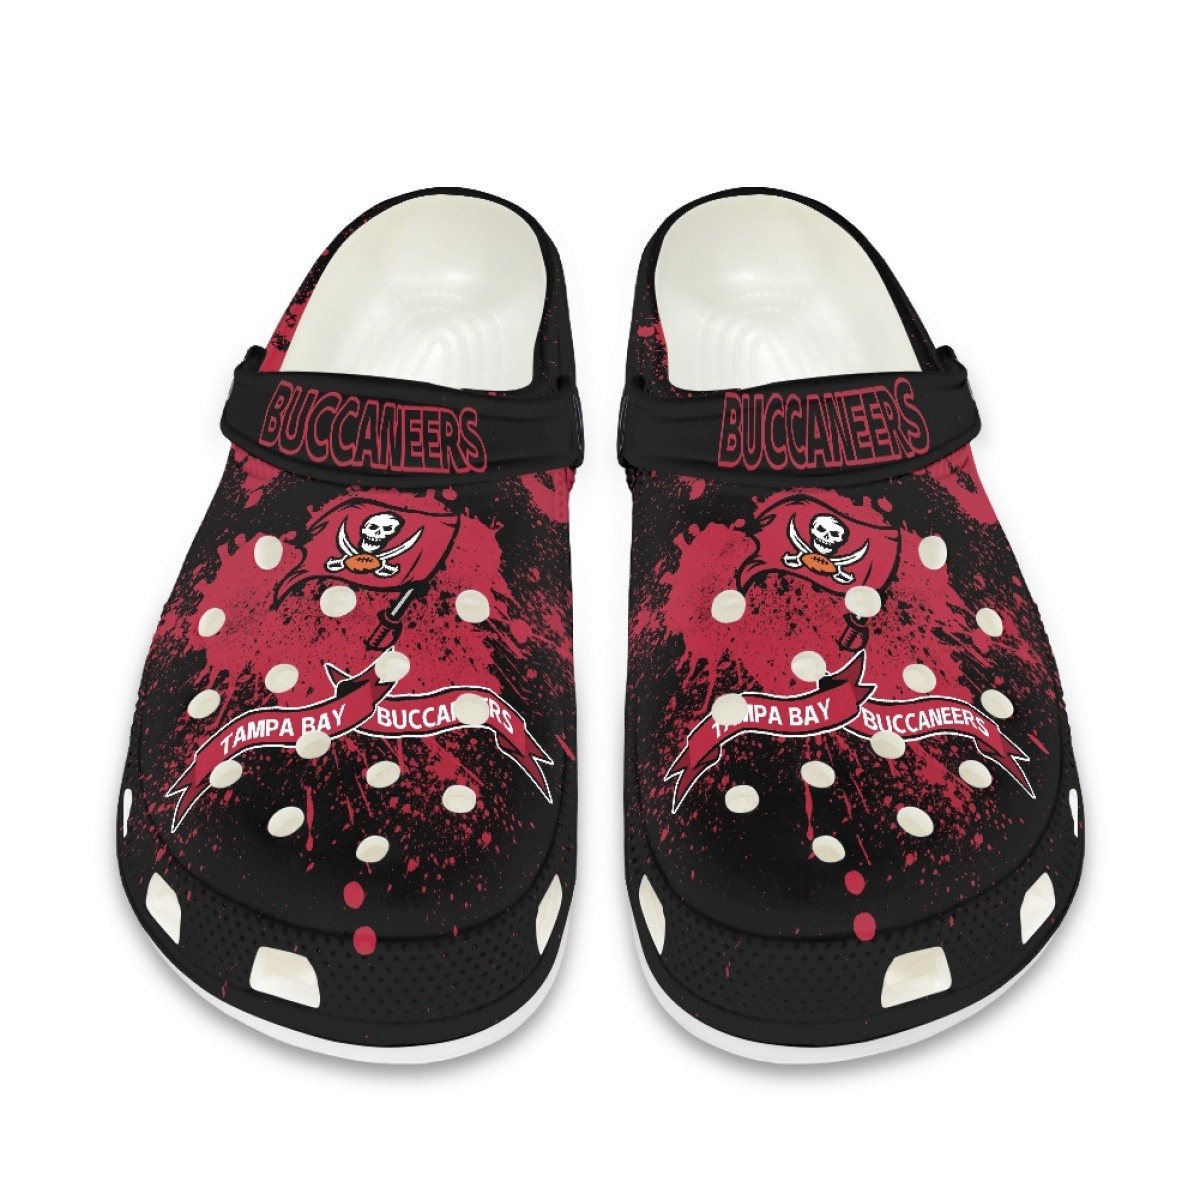 Tampa Bay Buccaneers Shoes cute Style#3 Crocs Shoes for fans -Jack ...